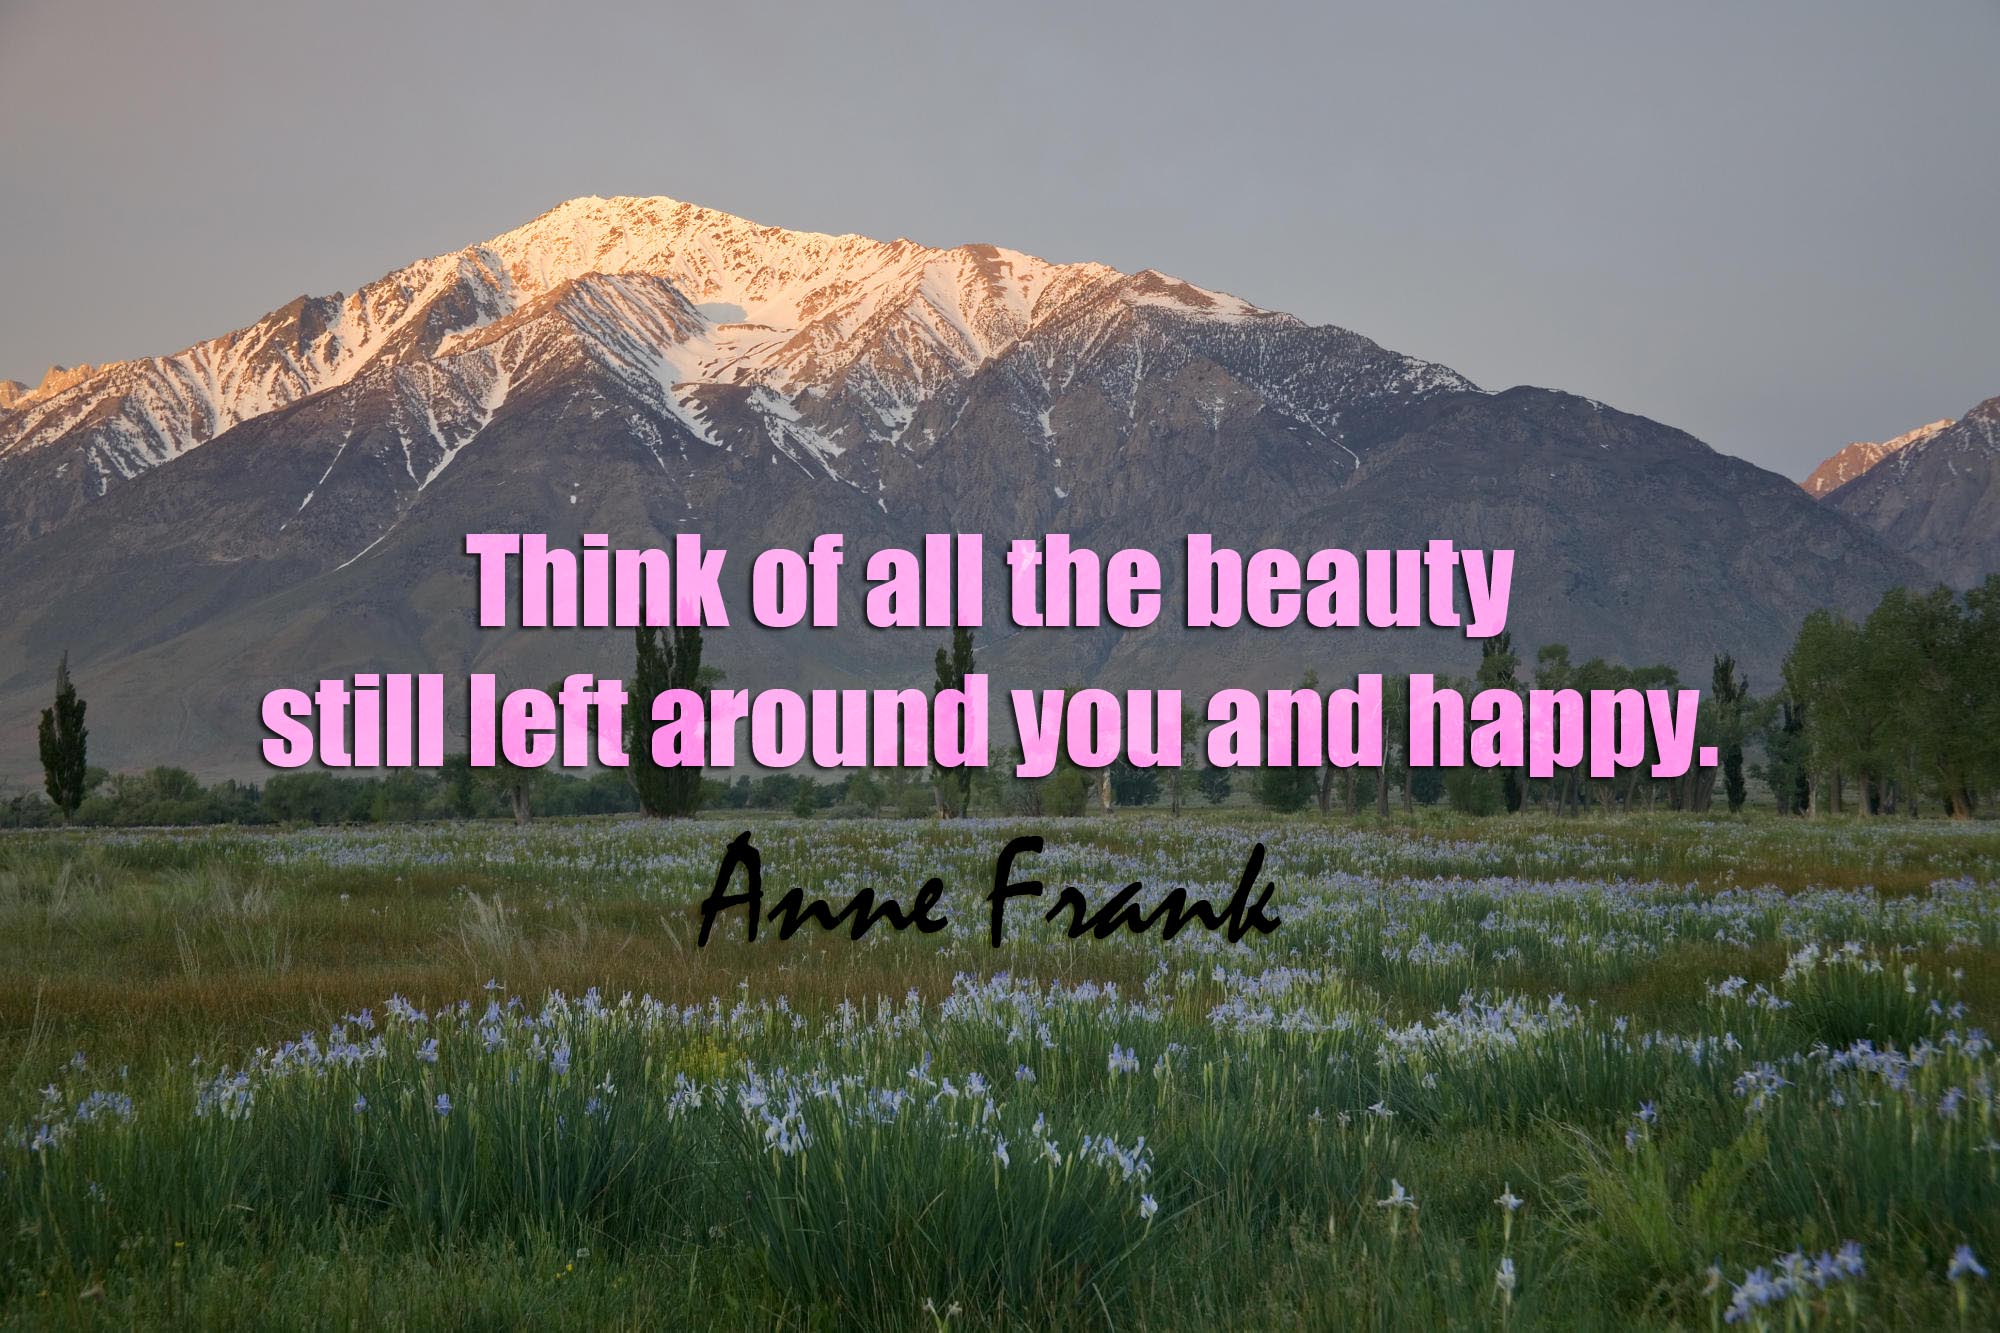 think of all the beauty still left around you and happy